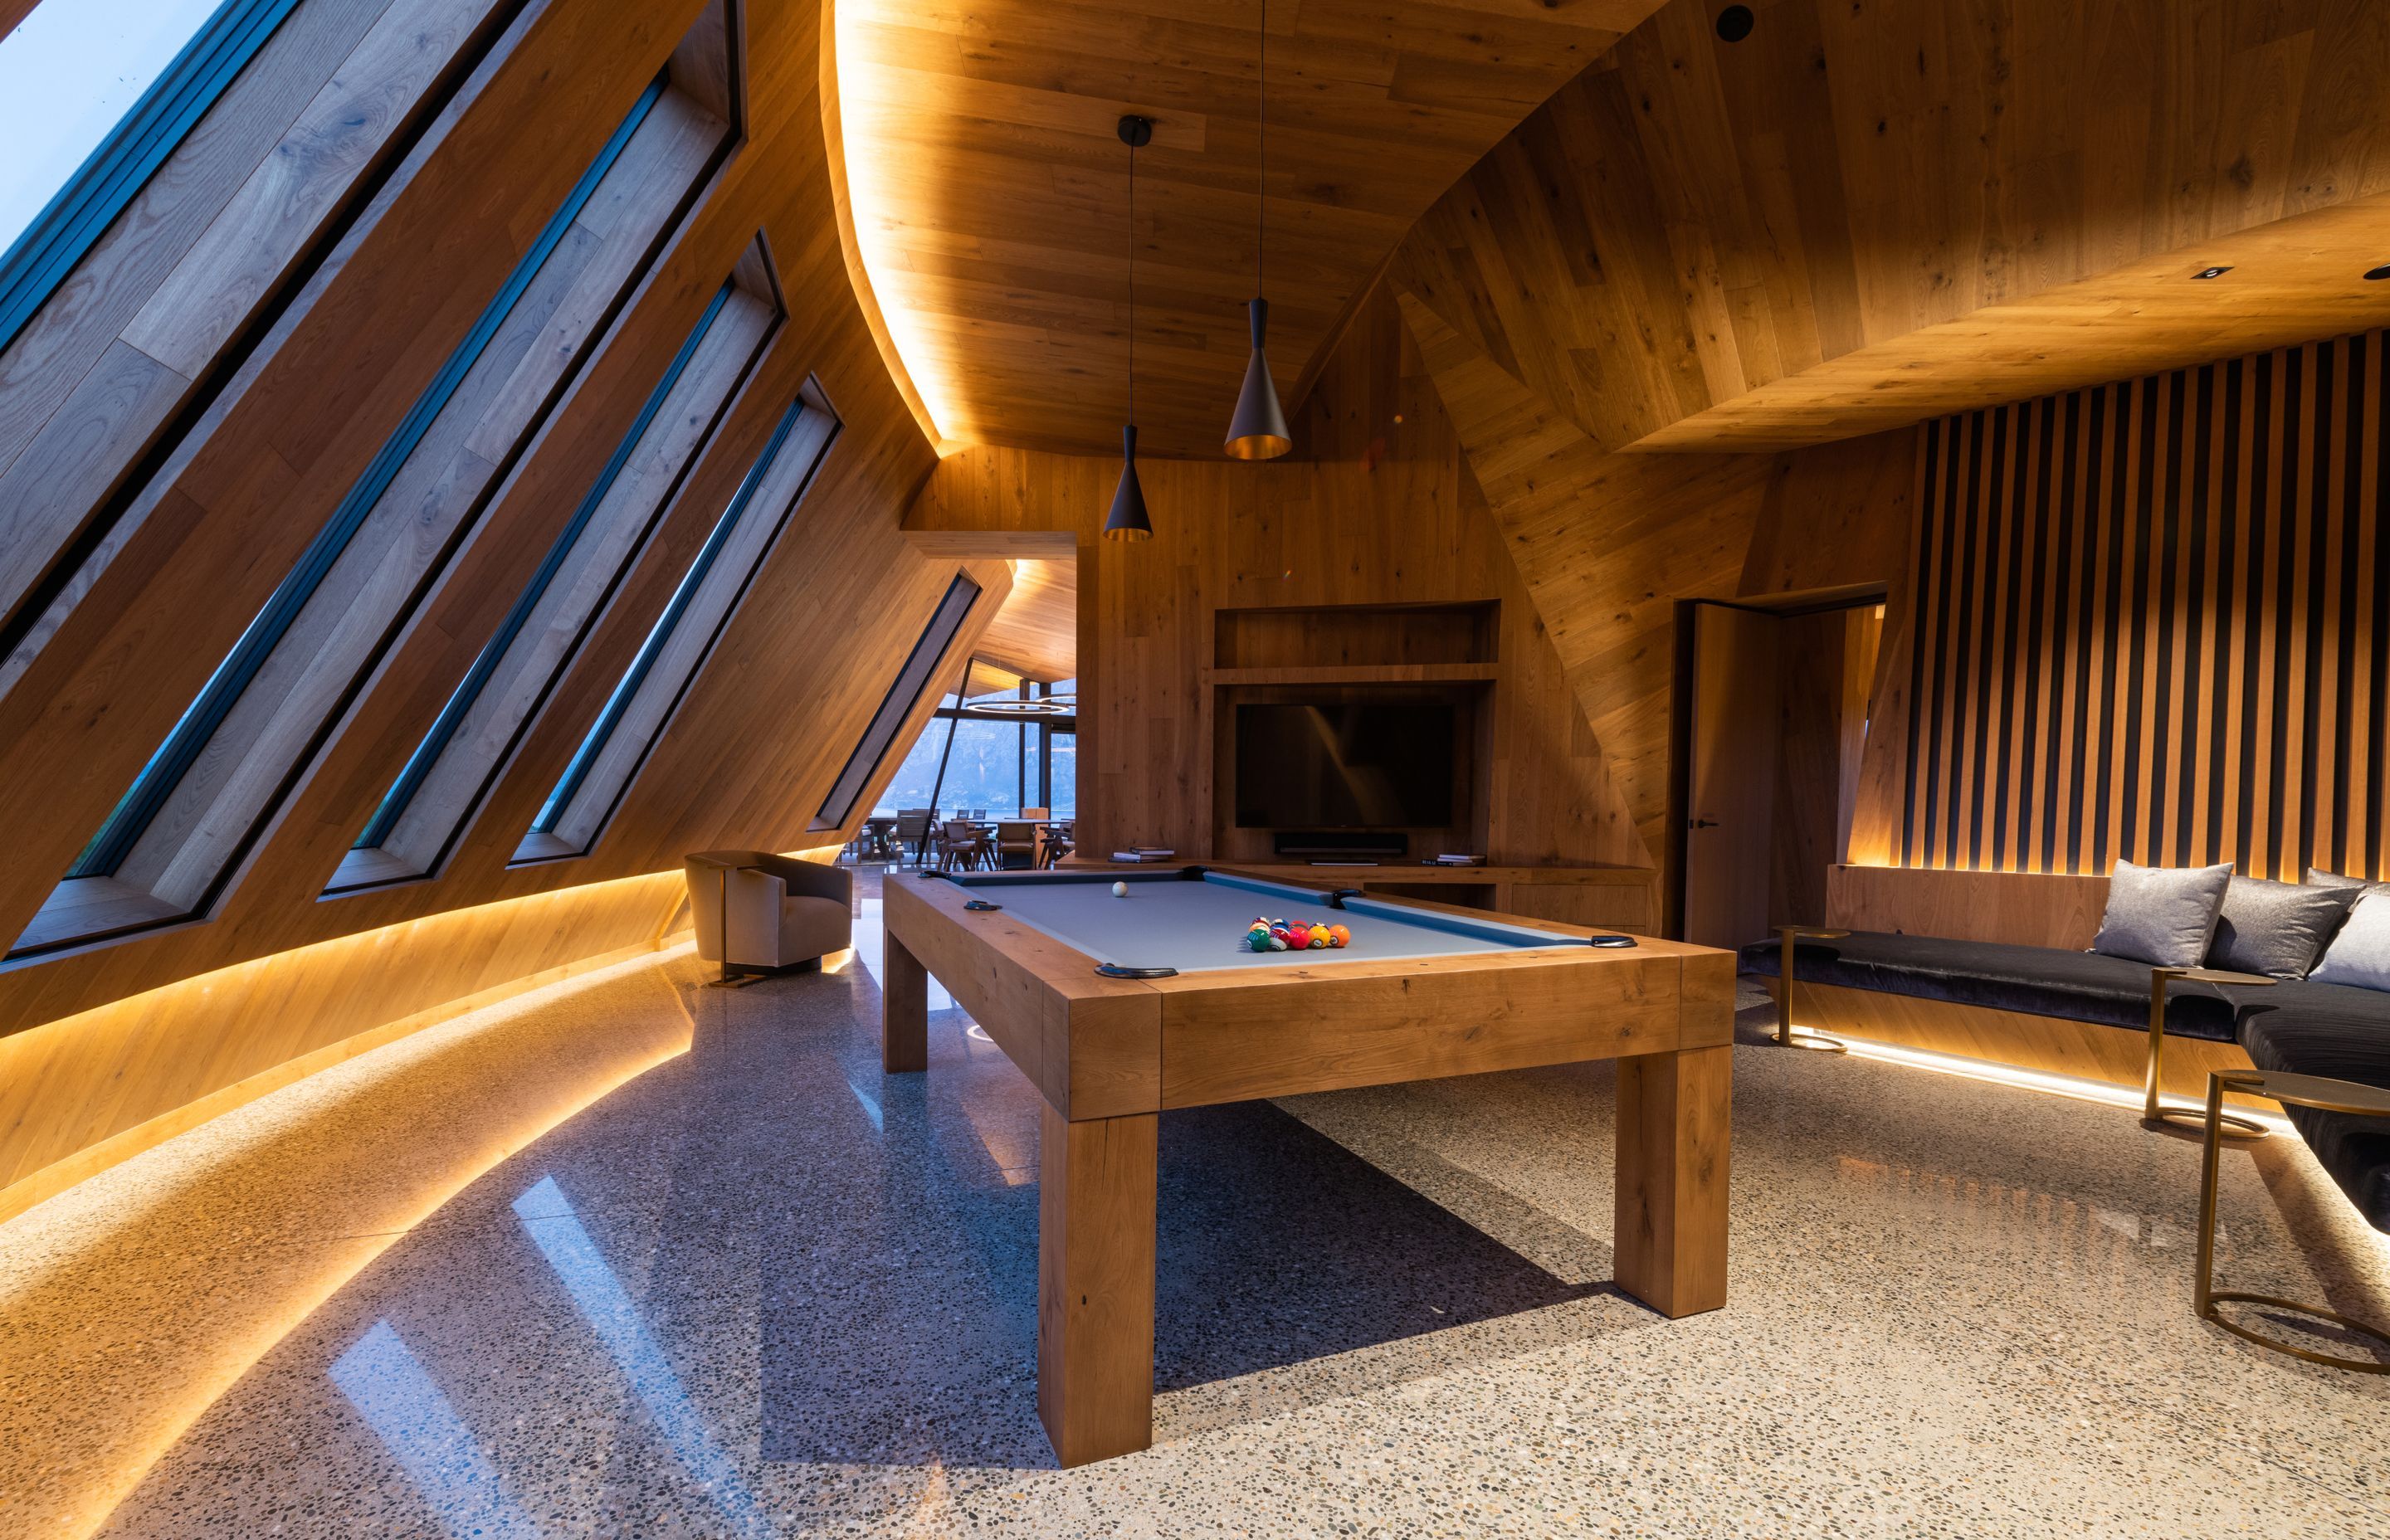 The games room is part of the lodge's entertainment amenities.